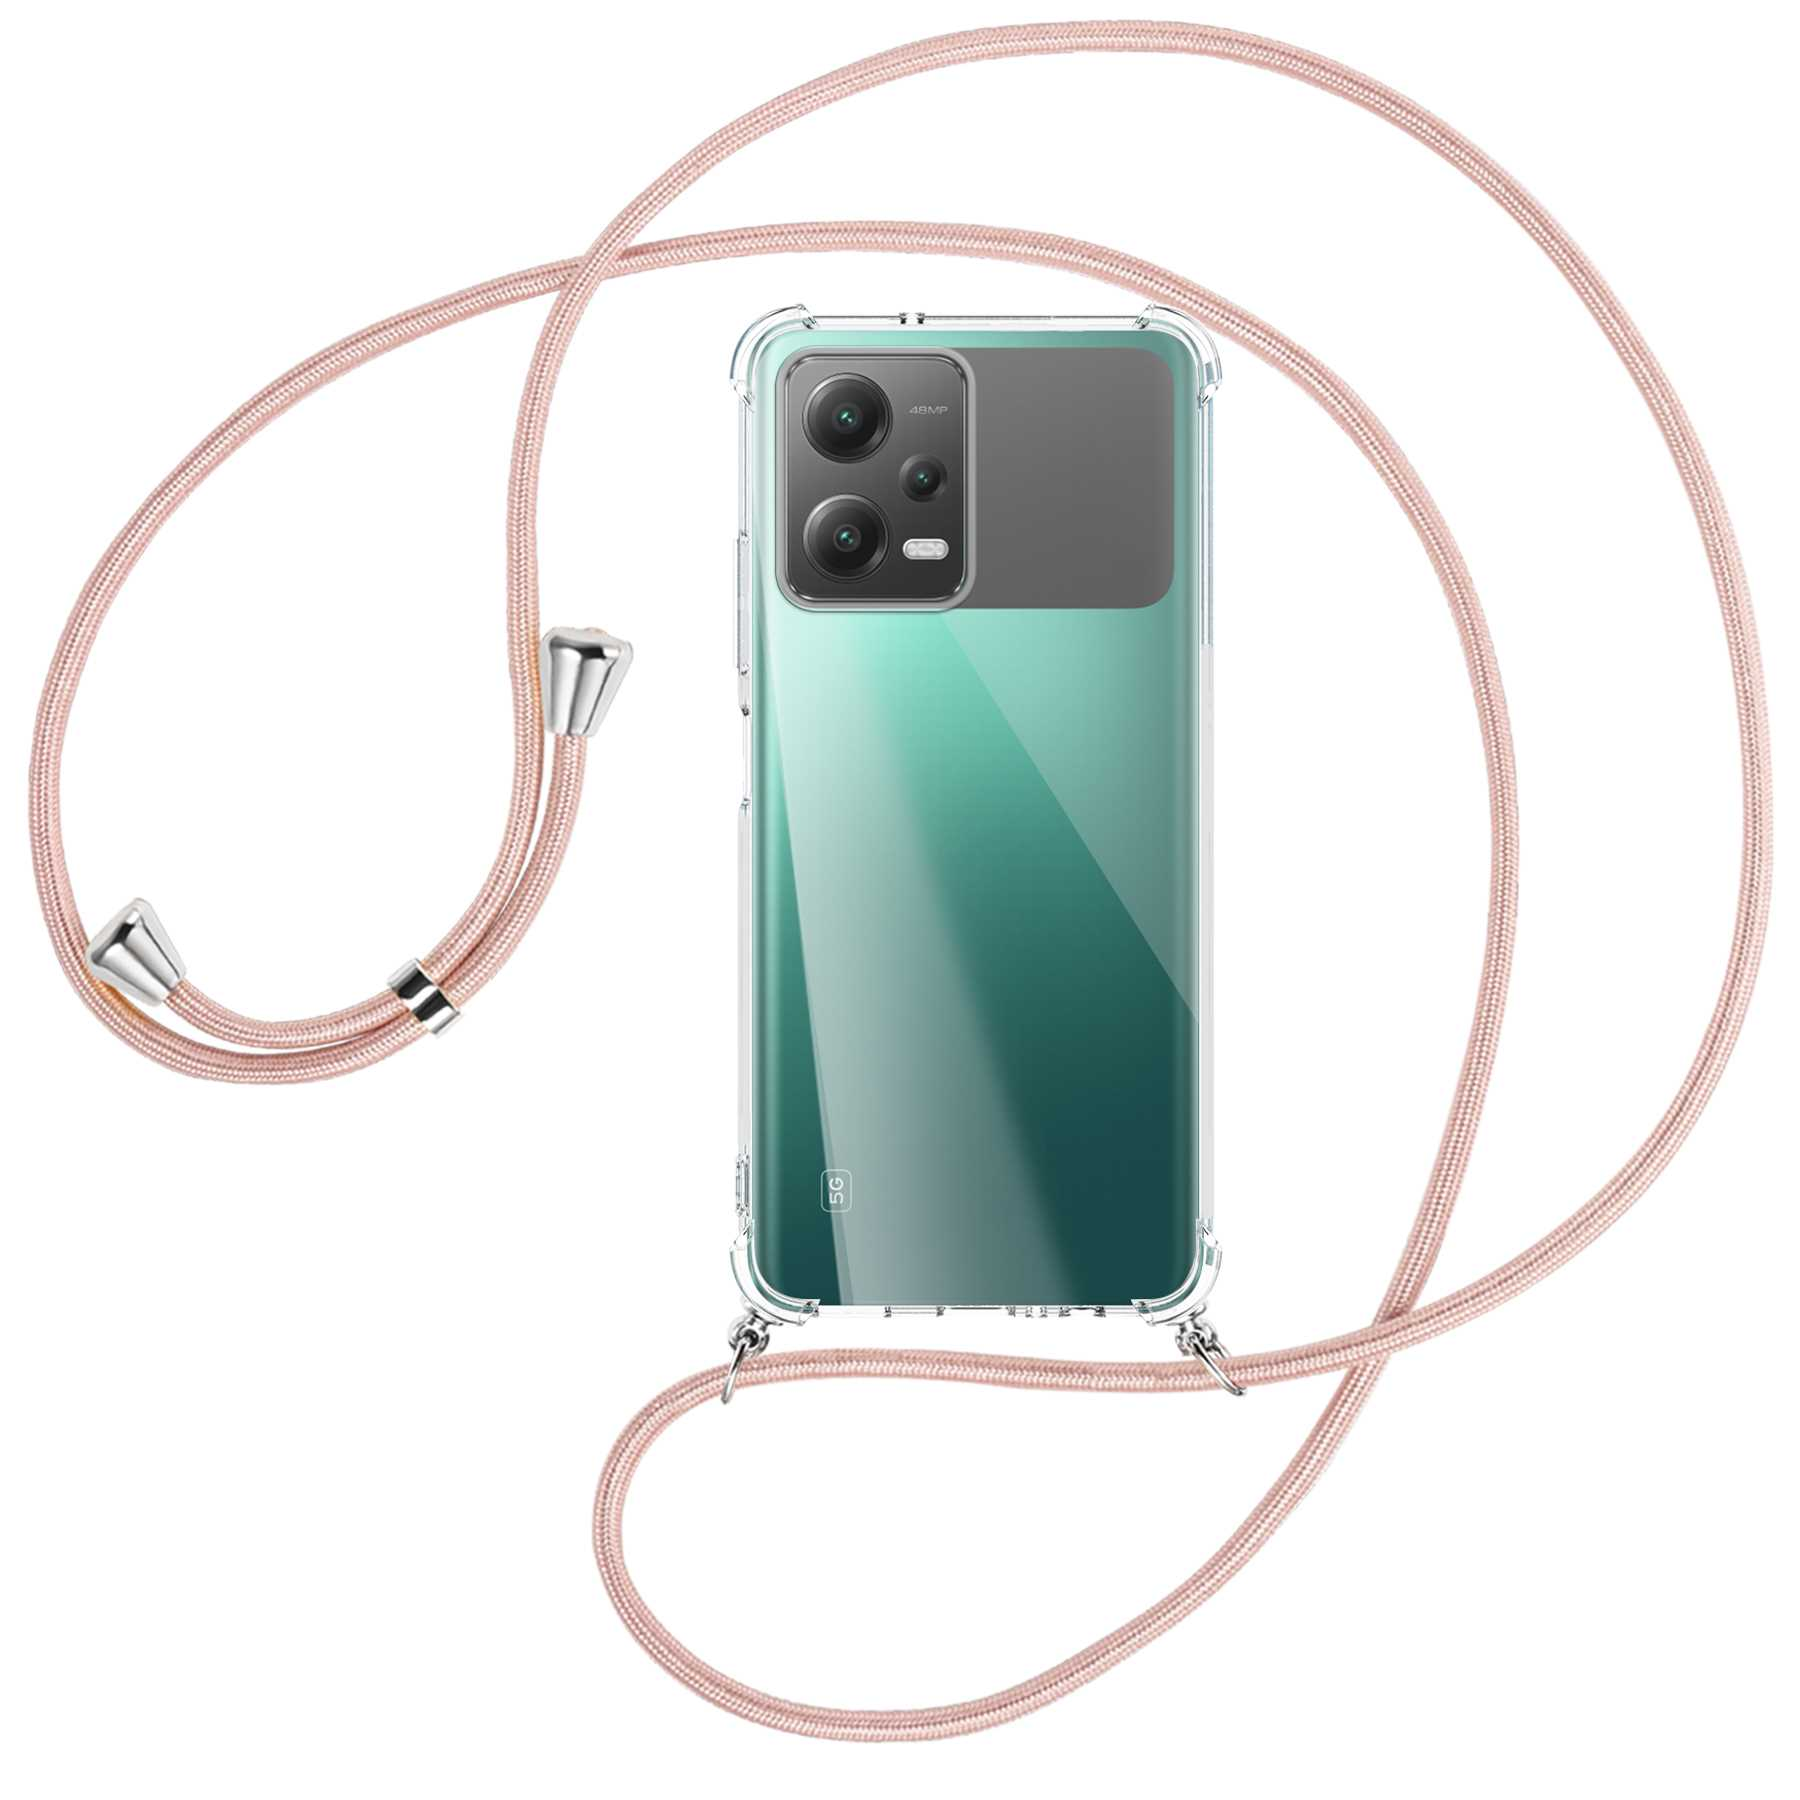 Rosegold mit 12 Poco silber MTB 5G, 5G, ENERGY X5 Redmi Backcover, Kordel, MORE Xiaomi, / Umhänge-Hülle Note